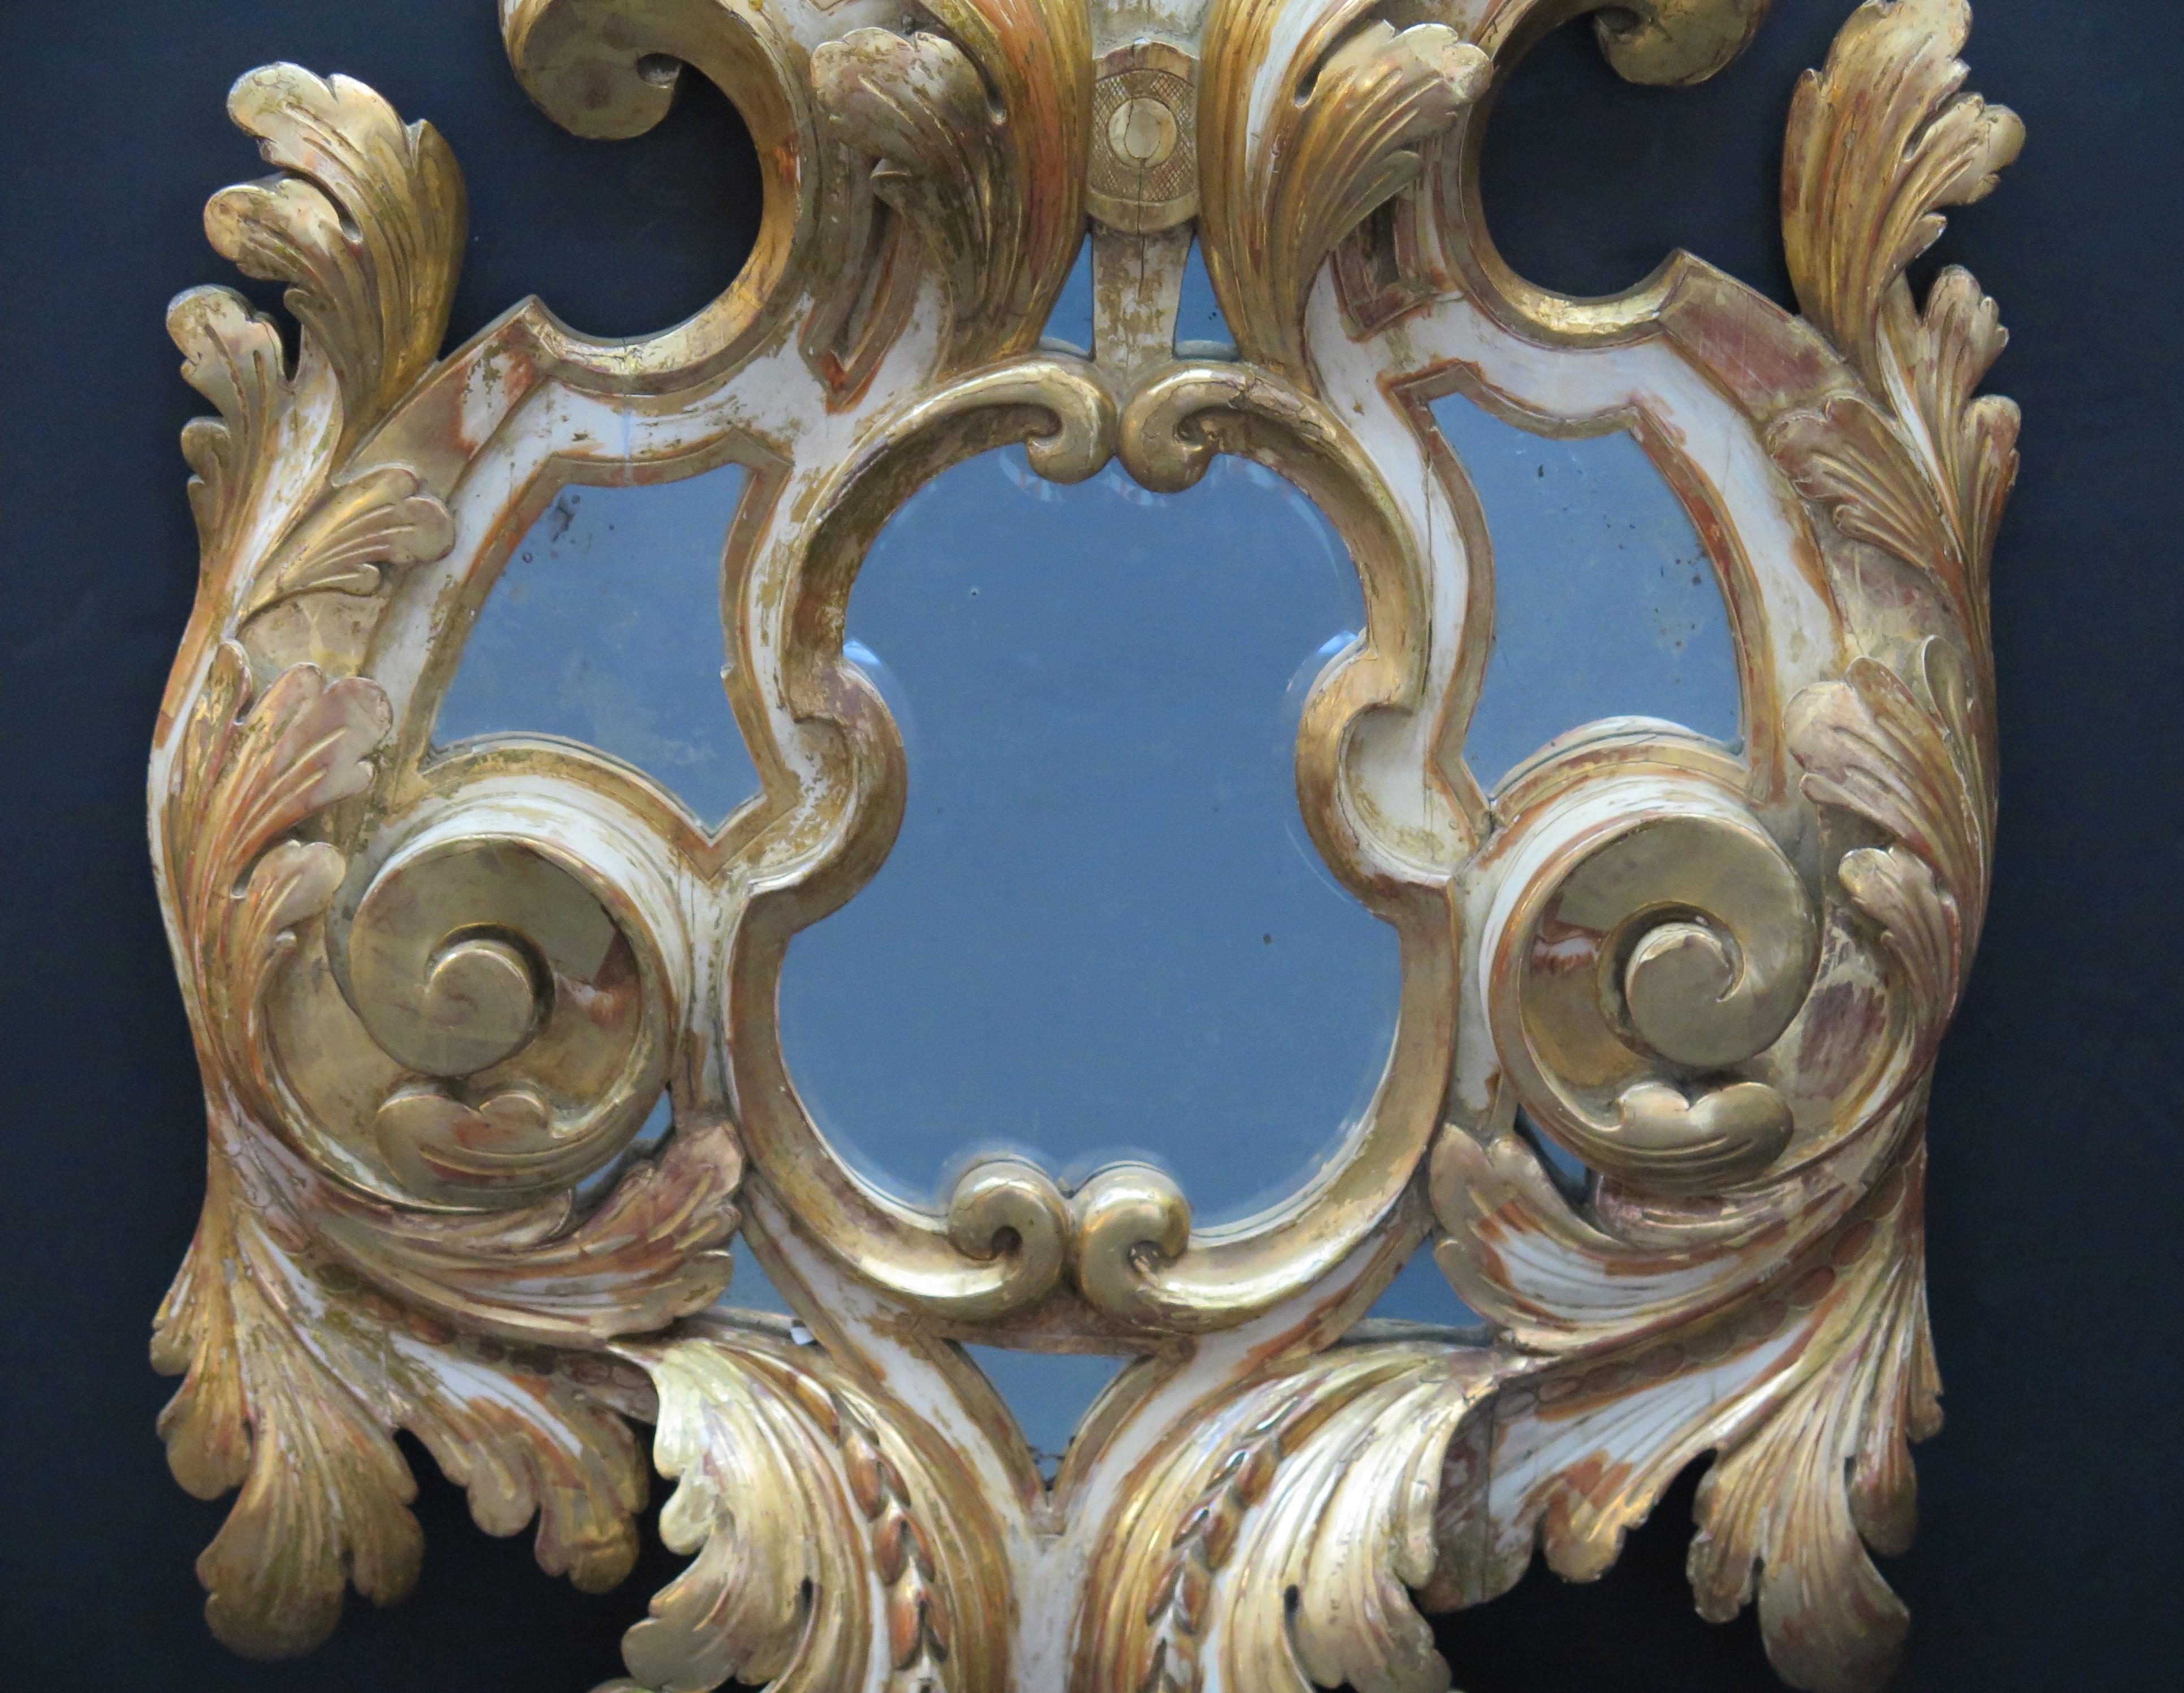 19th Century Large Baroque-Style Carved Giltwood Mirror C. 1850, Italy For Sale